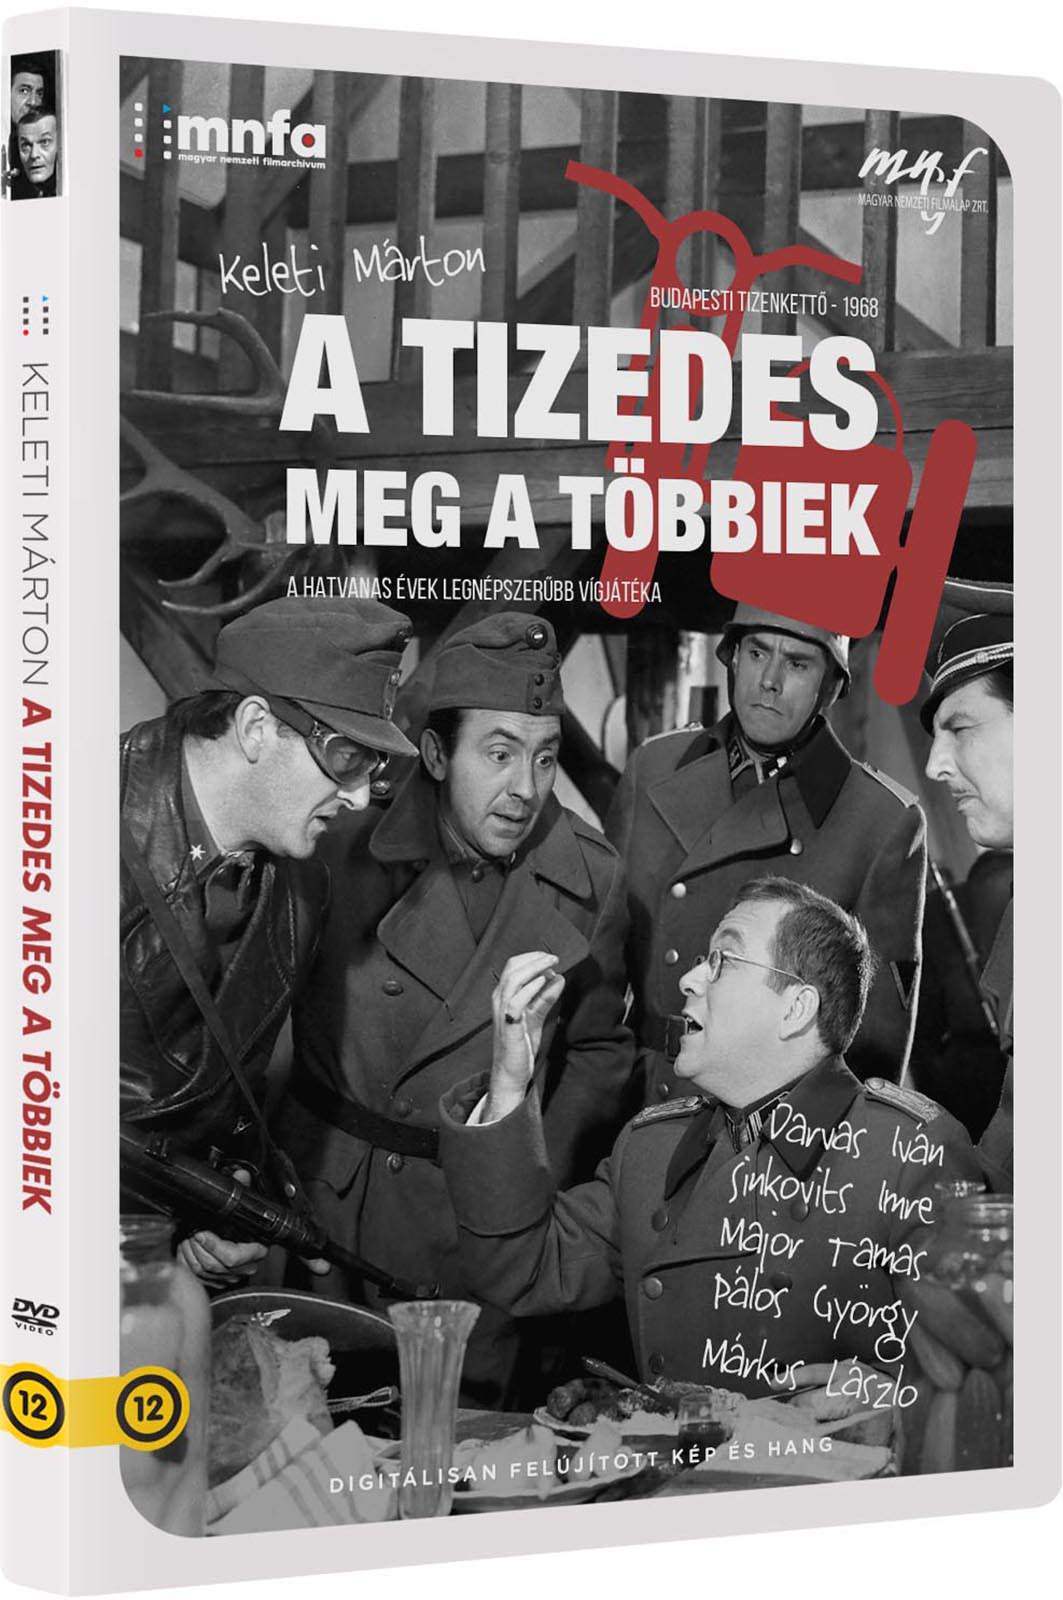 The Corporal and Others / A tizedes meg a tobbiek DVD